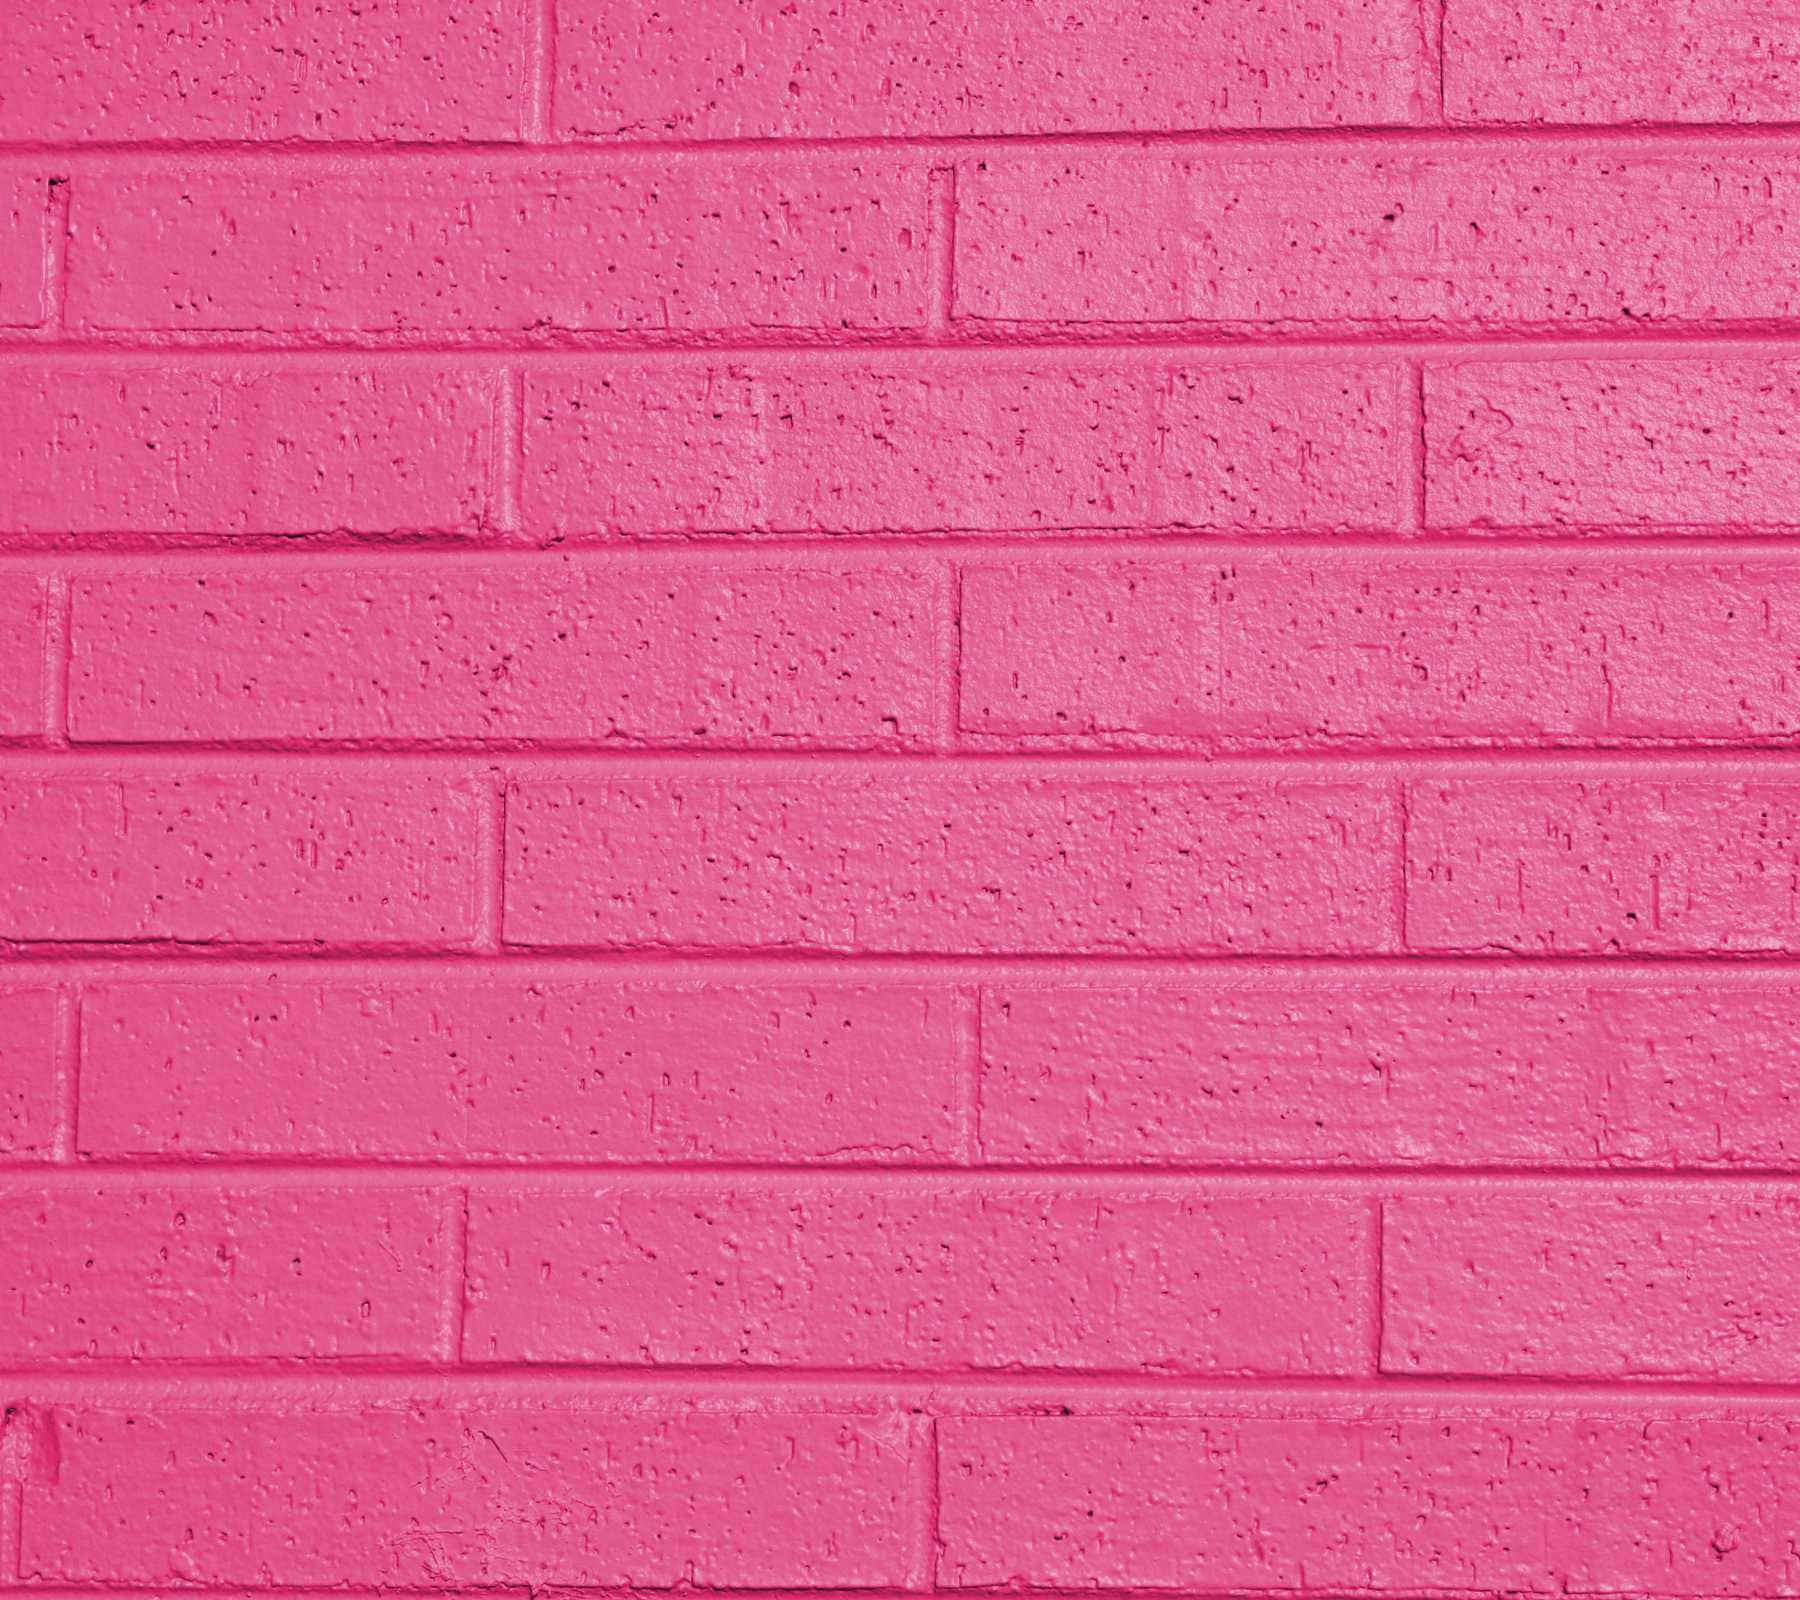 A Bright Pink Background Perfect for Any Wall